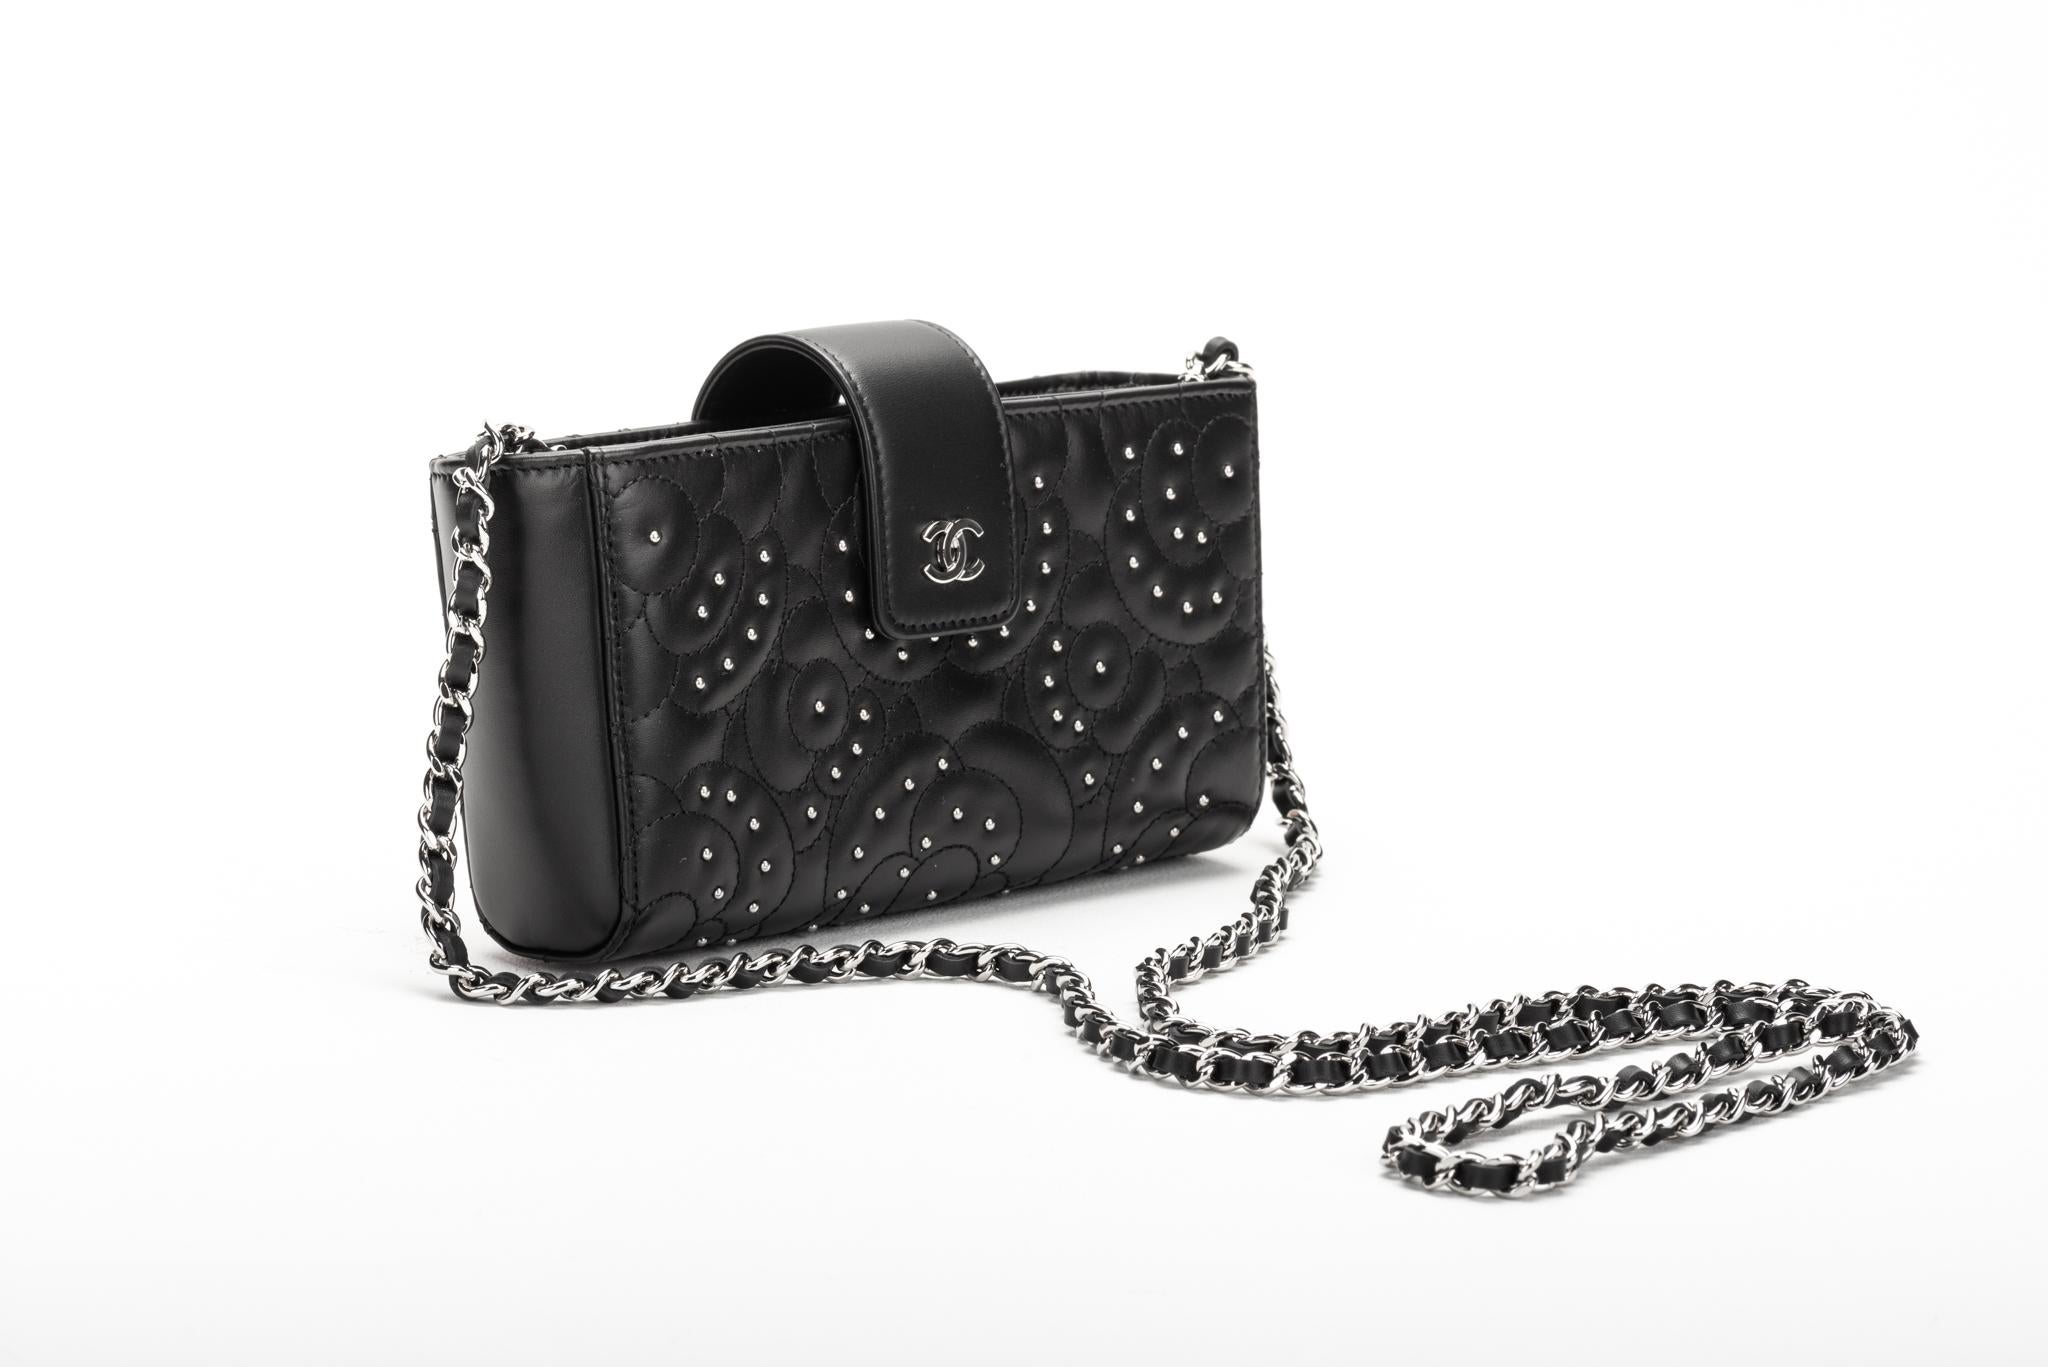 New in box, Chanel black lambskin camellia studs cross body bag. One zipped center compartment and two side open pockets. Detachable strap, shoulder drop 24